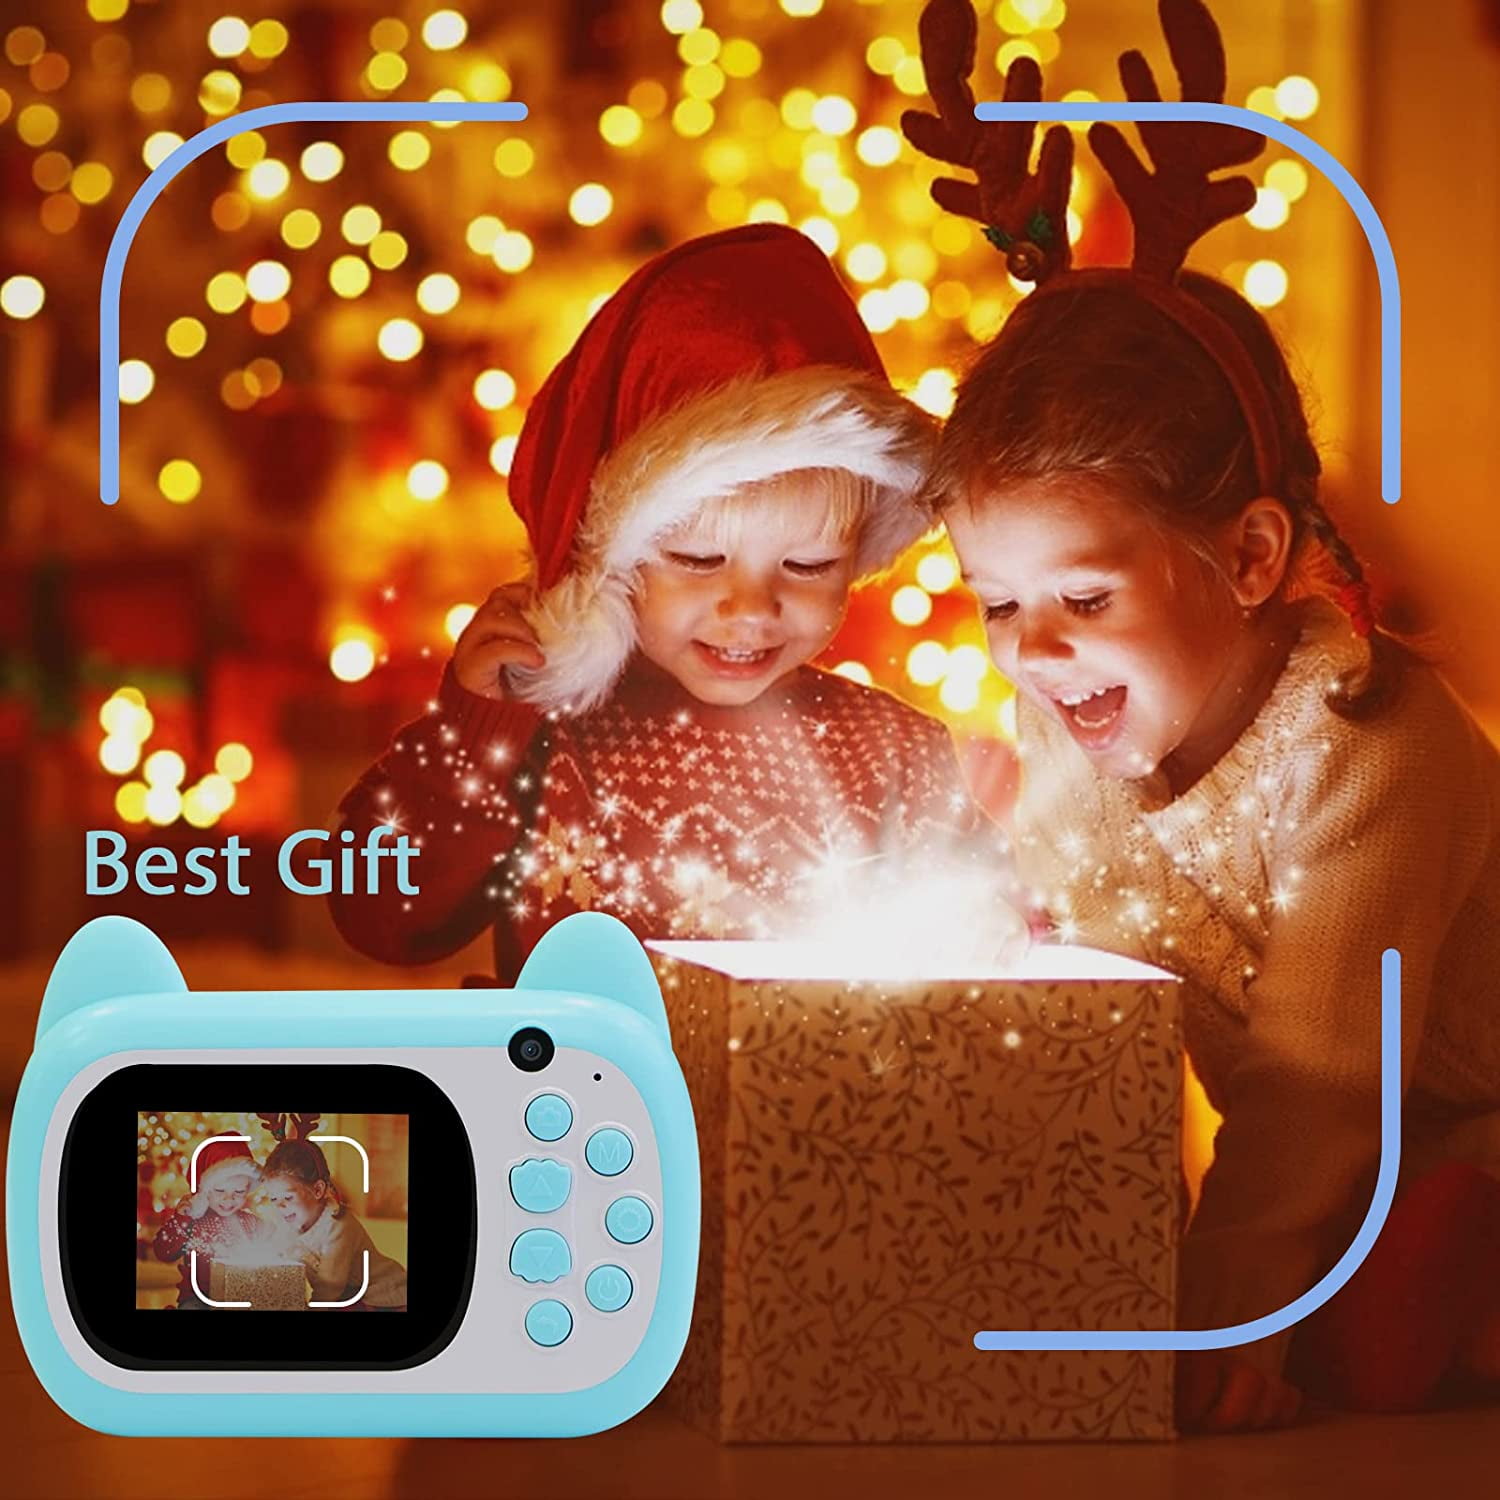 Instant Print Toy Instant Camera For Kids Ages 3 12 Perfect Birthday Gift  For Boys And Girls 1080P HD Video Recording, Selfie Digital Printing From  Xinweitech, $30.26